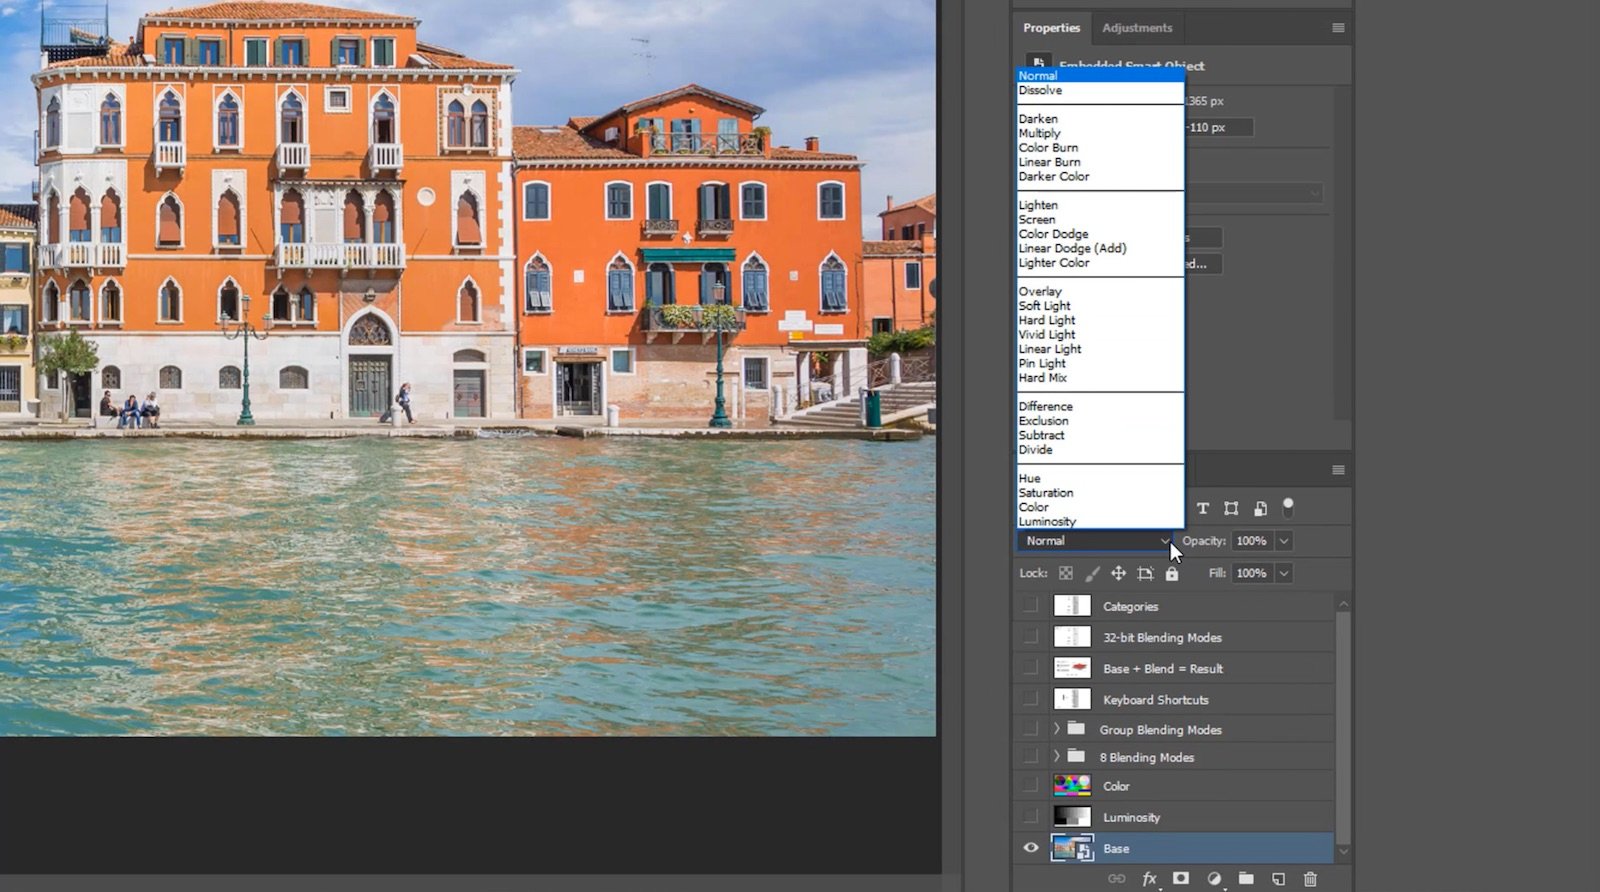 This Video Explains All 27 Photoshop Blending Modes in Detail